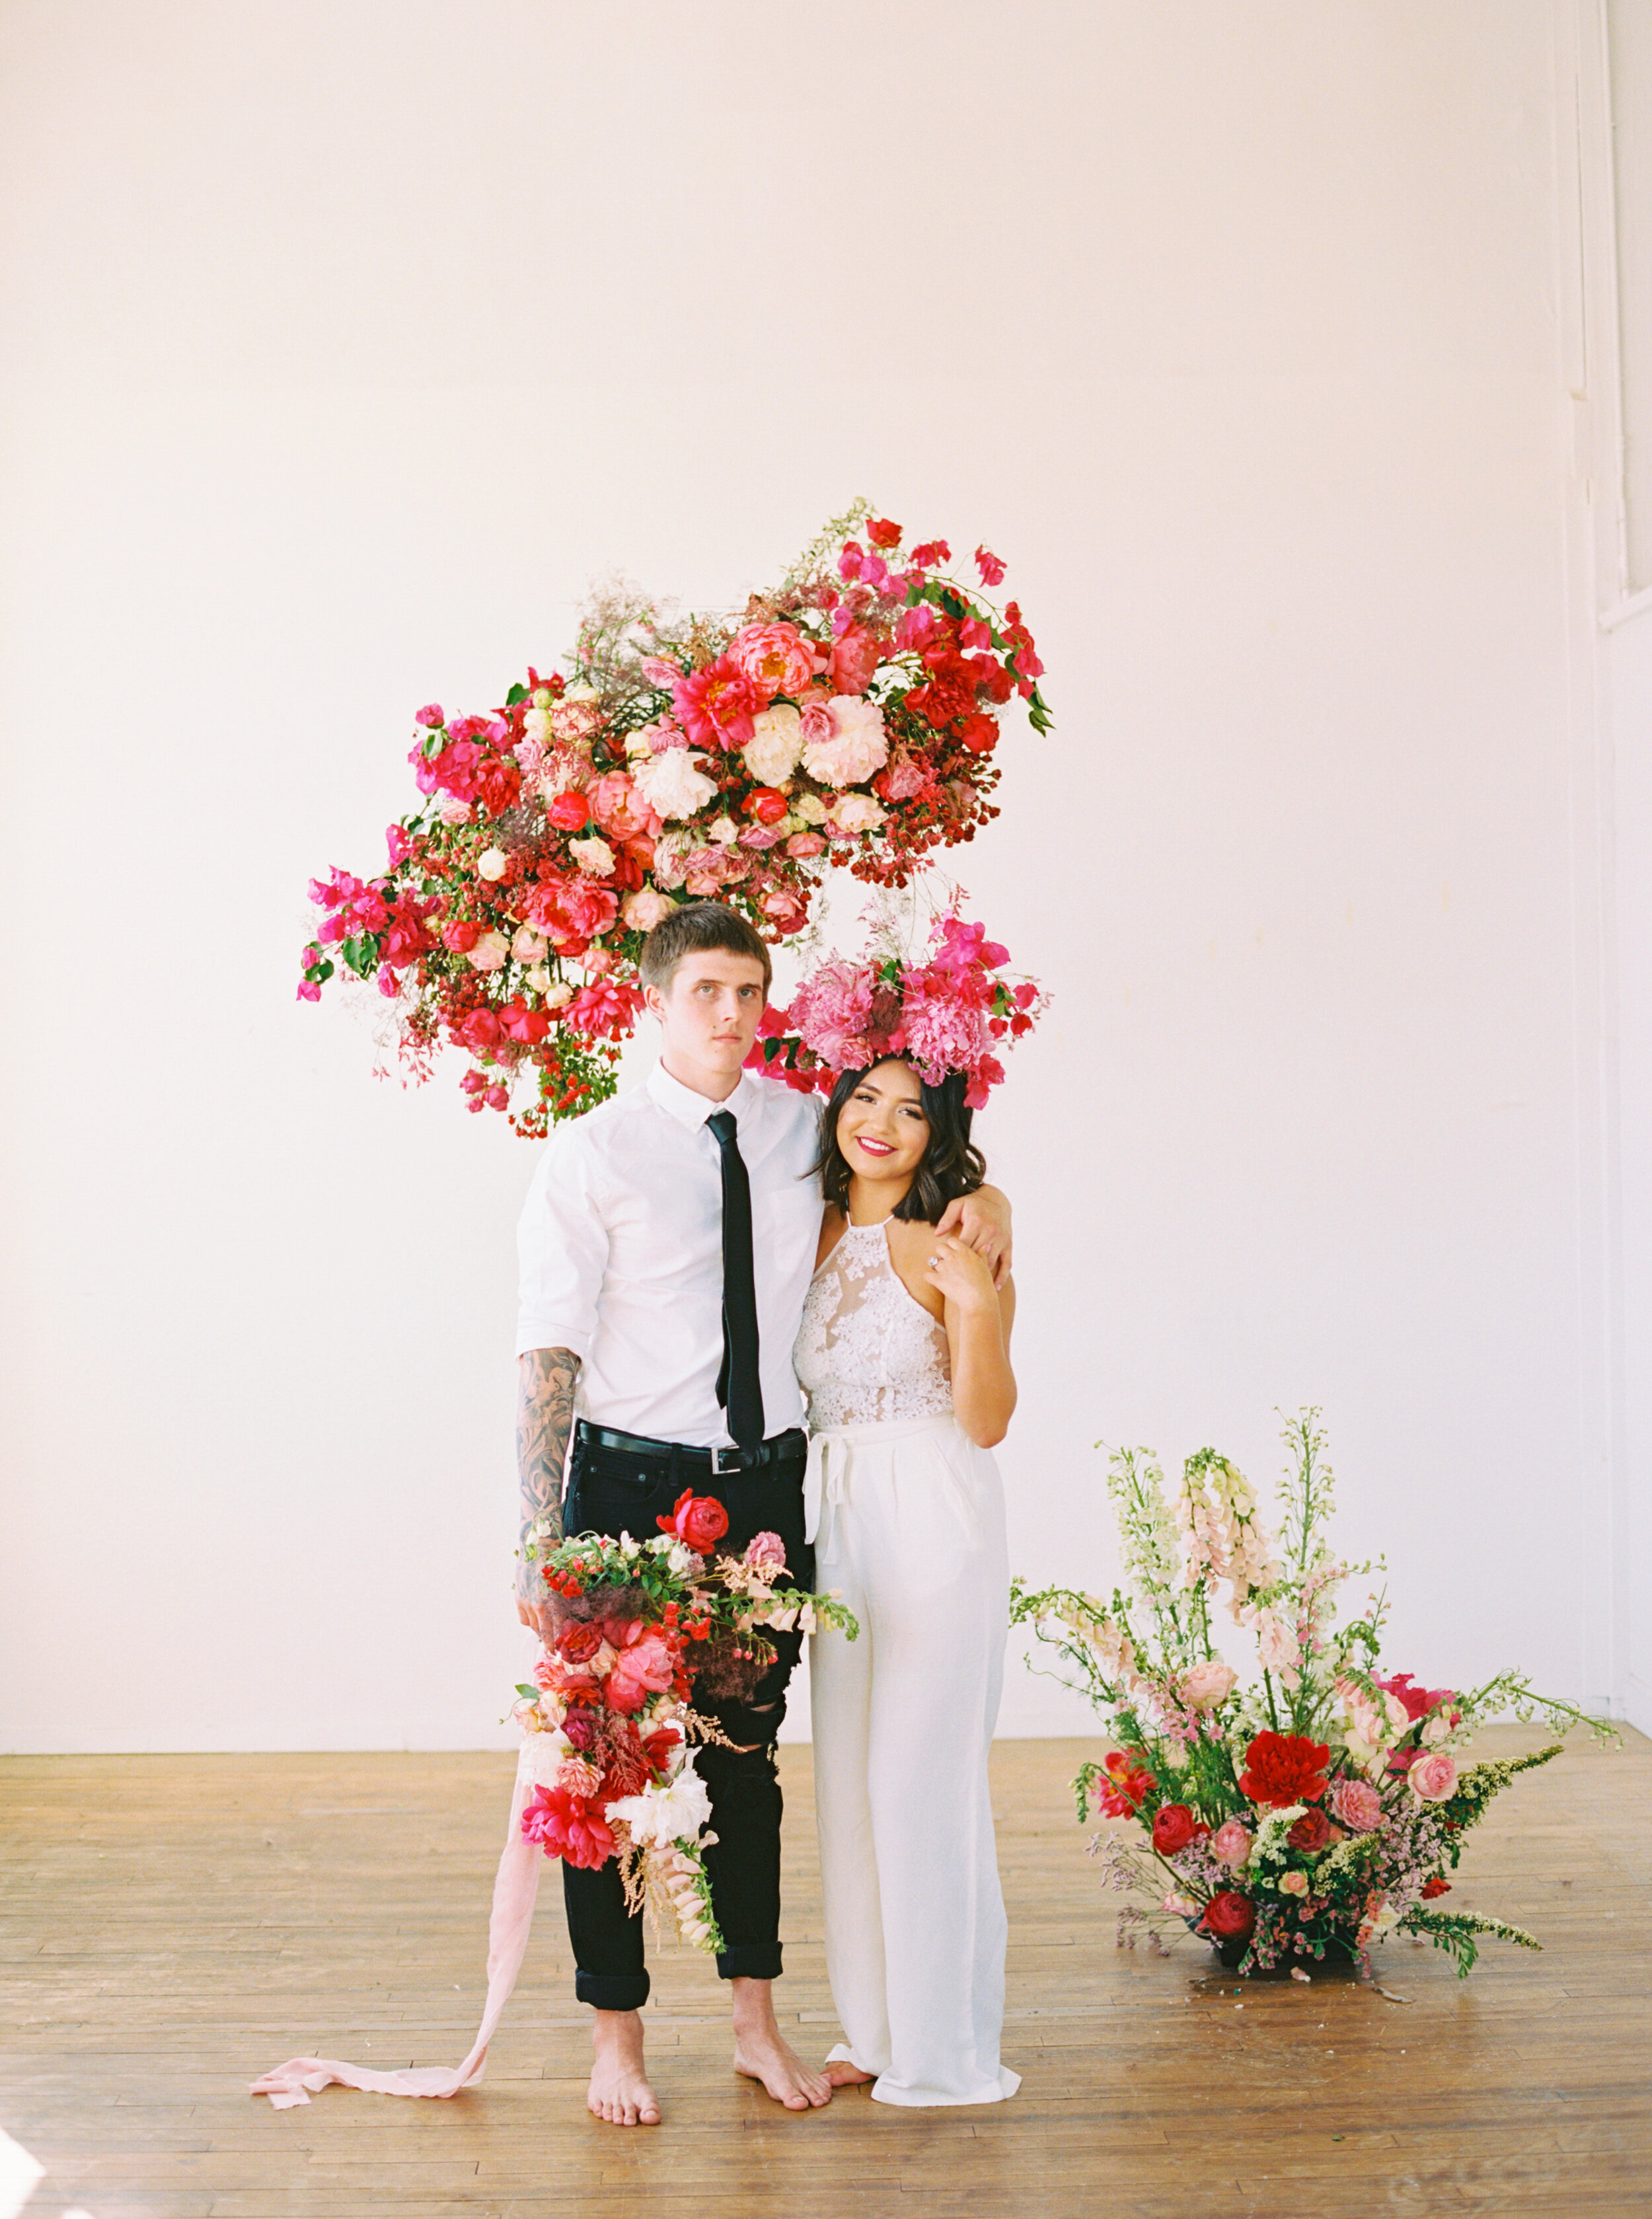 A Romantic Wedding Elopement Filled with Colorful Fuchsia - Sarahi Hadden Submission-109.jpg